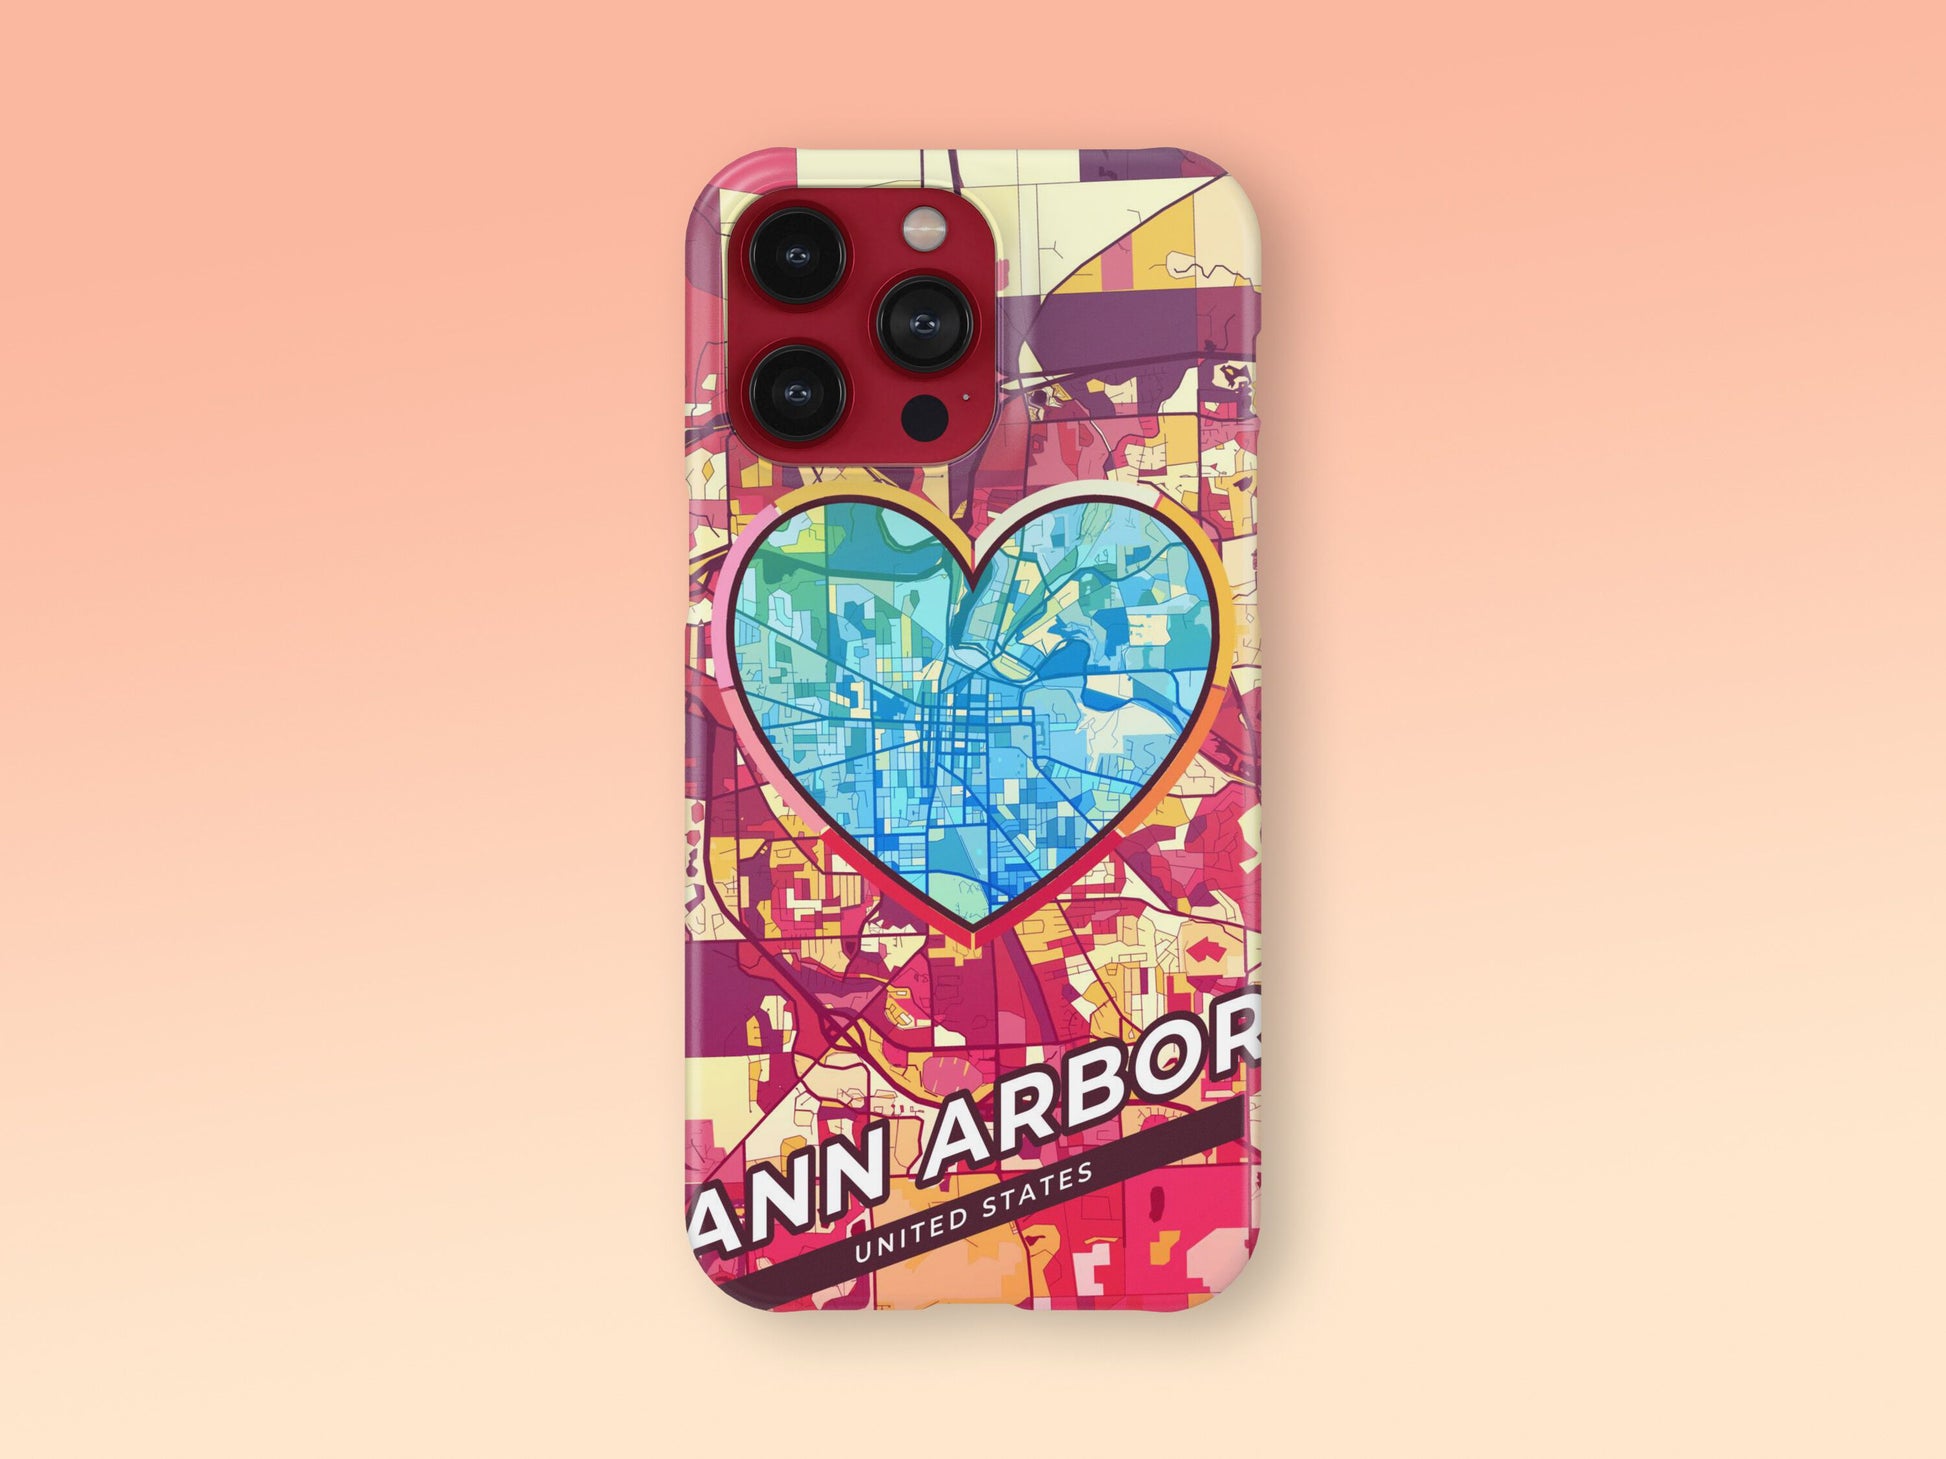 Ann Arbor Michigan slim phone case with colorful icon. Birthday, wedding or housewarming gift. Couple match cases. 2